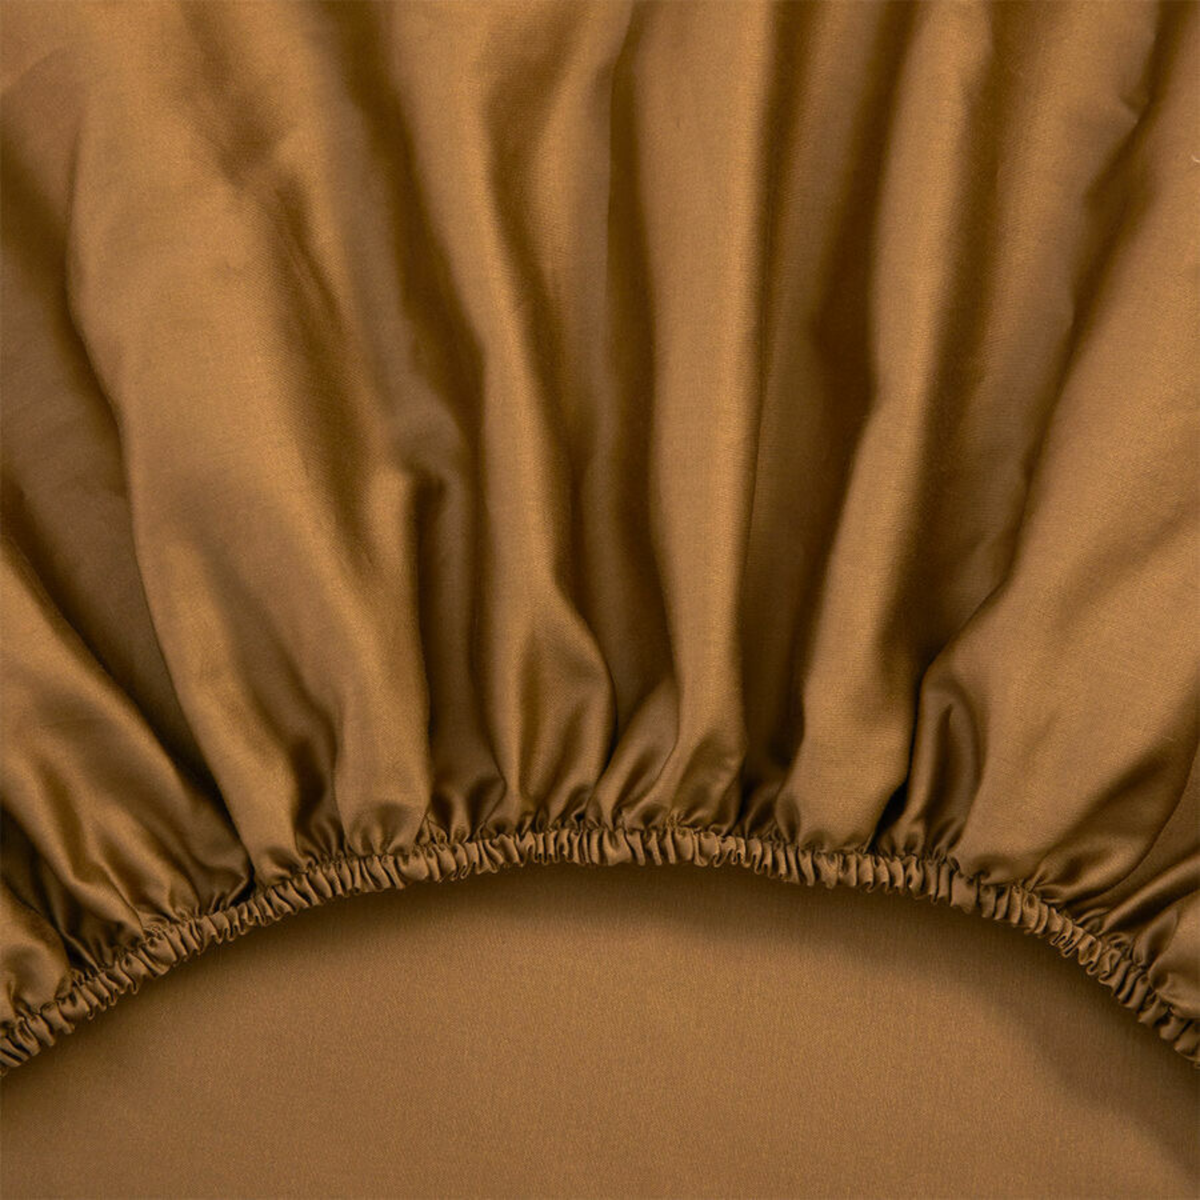 Underside of Fitted Sheet of Yves Delorme Triomphe Bedding in Bronze Color